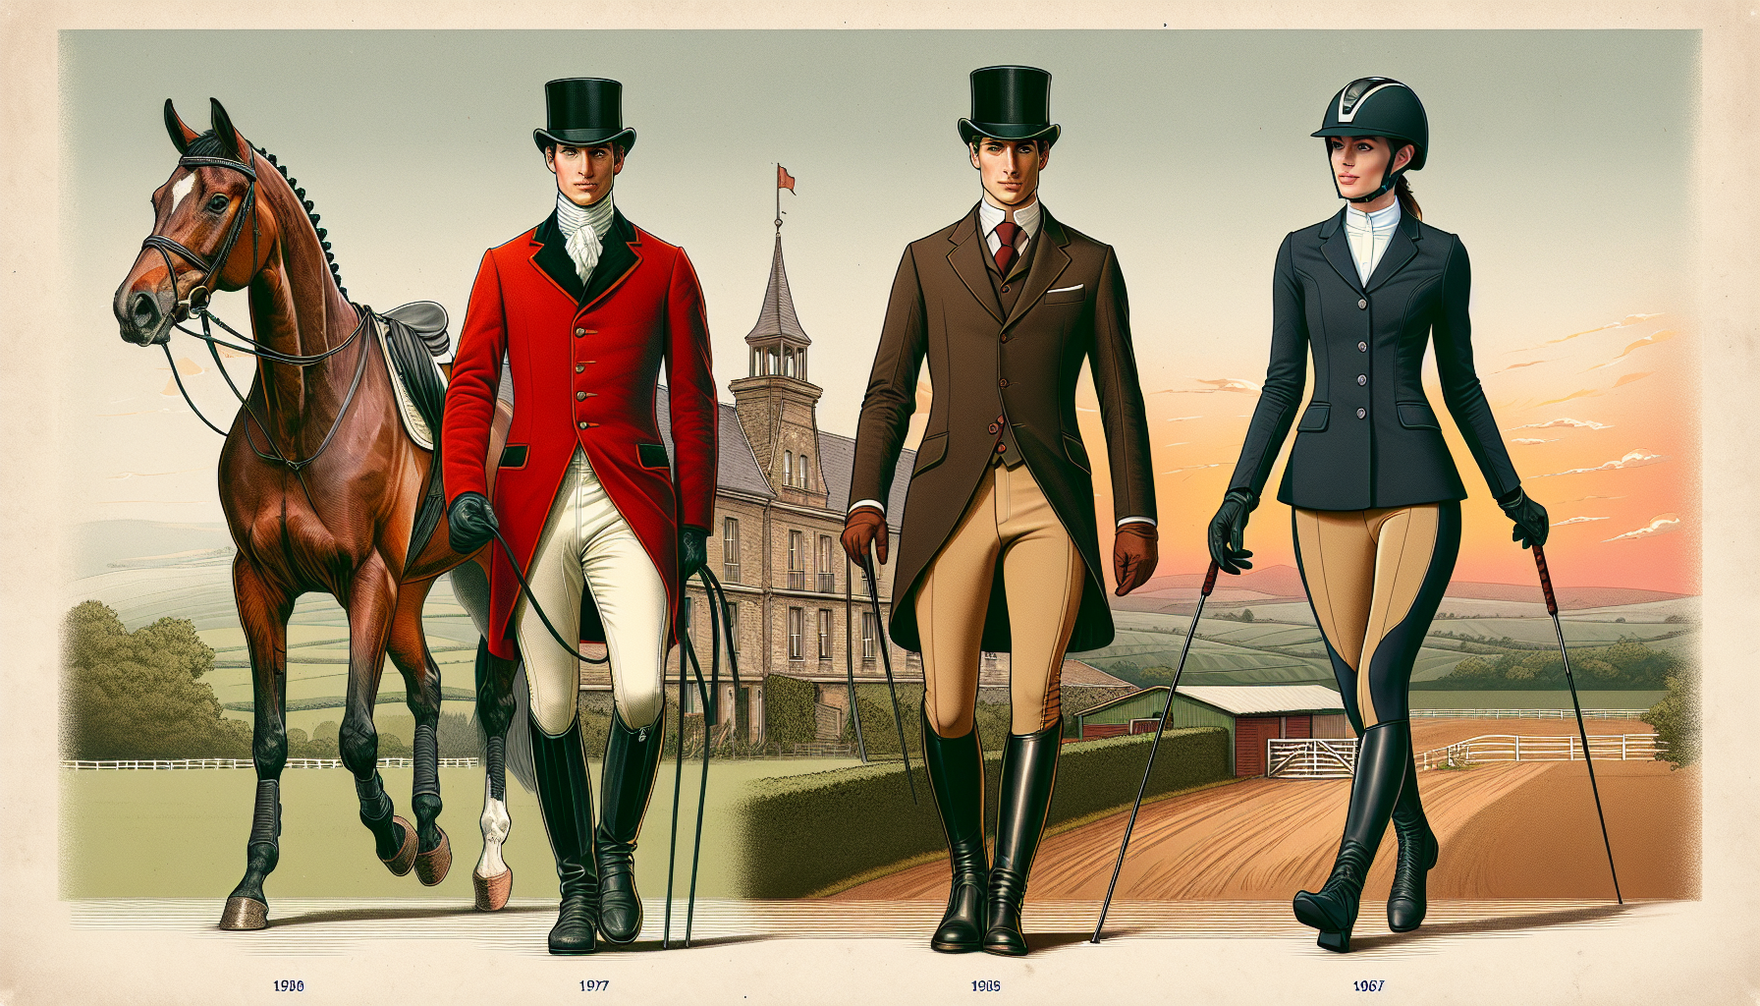 A visual representation showing the evolution of equestrian style. On one side, illustrate a classic horseman from the 19th century, sporting a traditional riding outfit with high-boots, a hunting cap